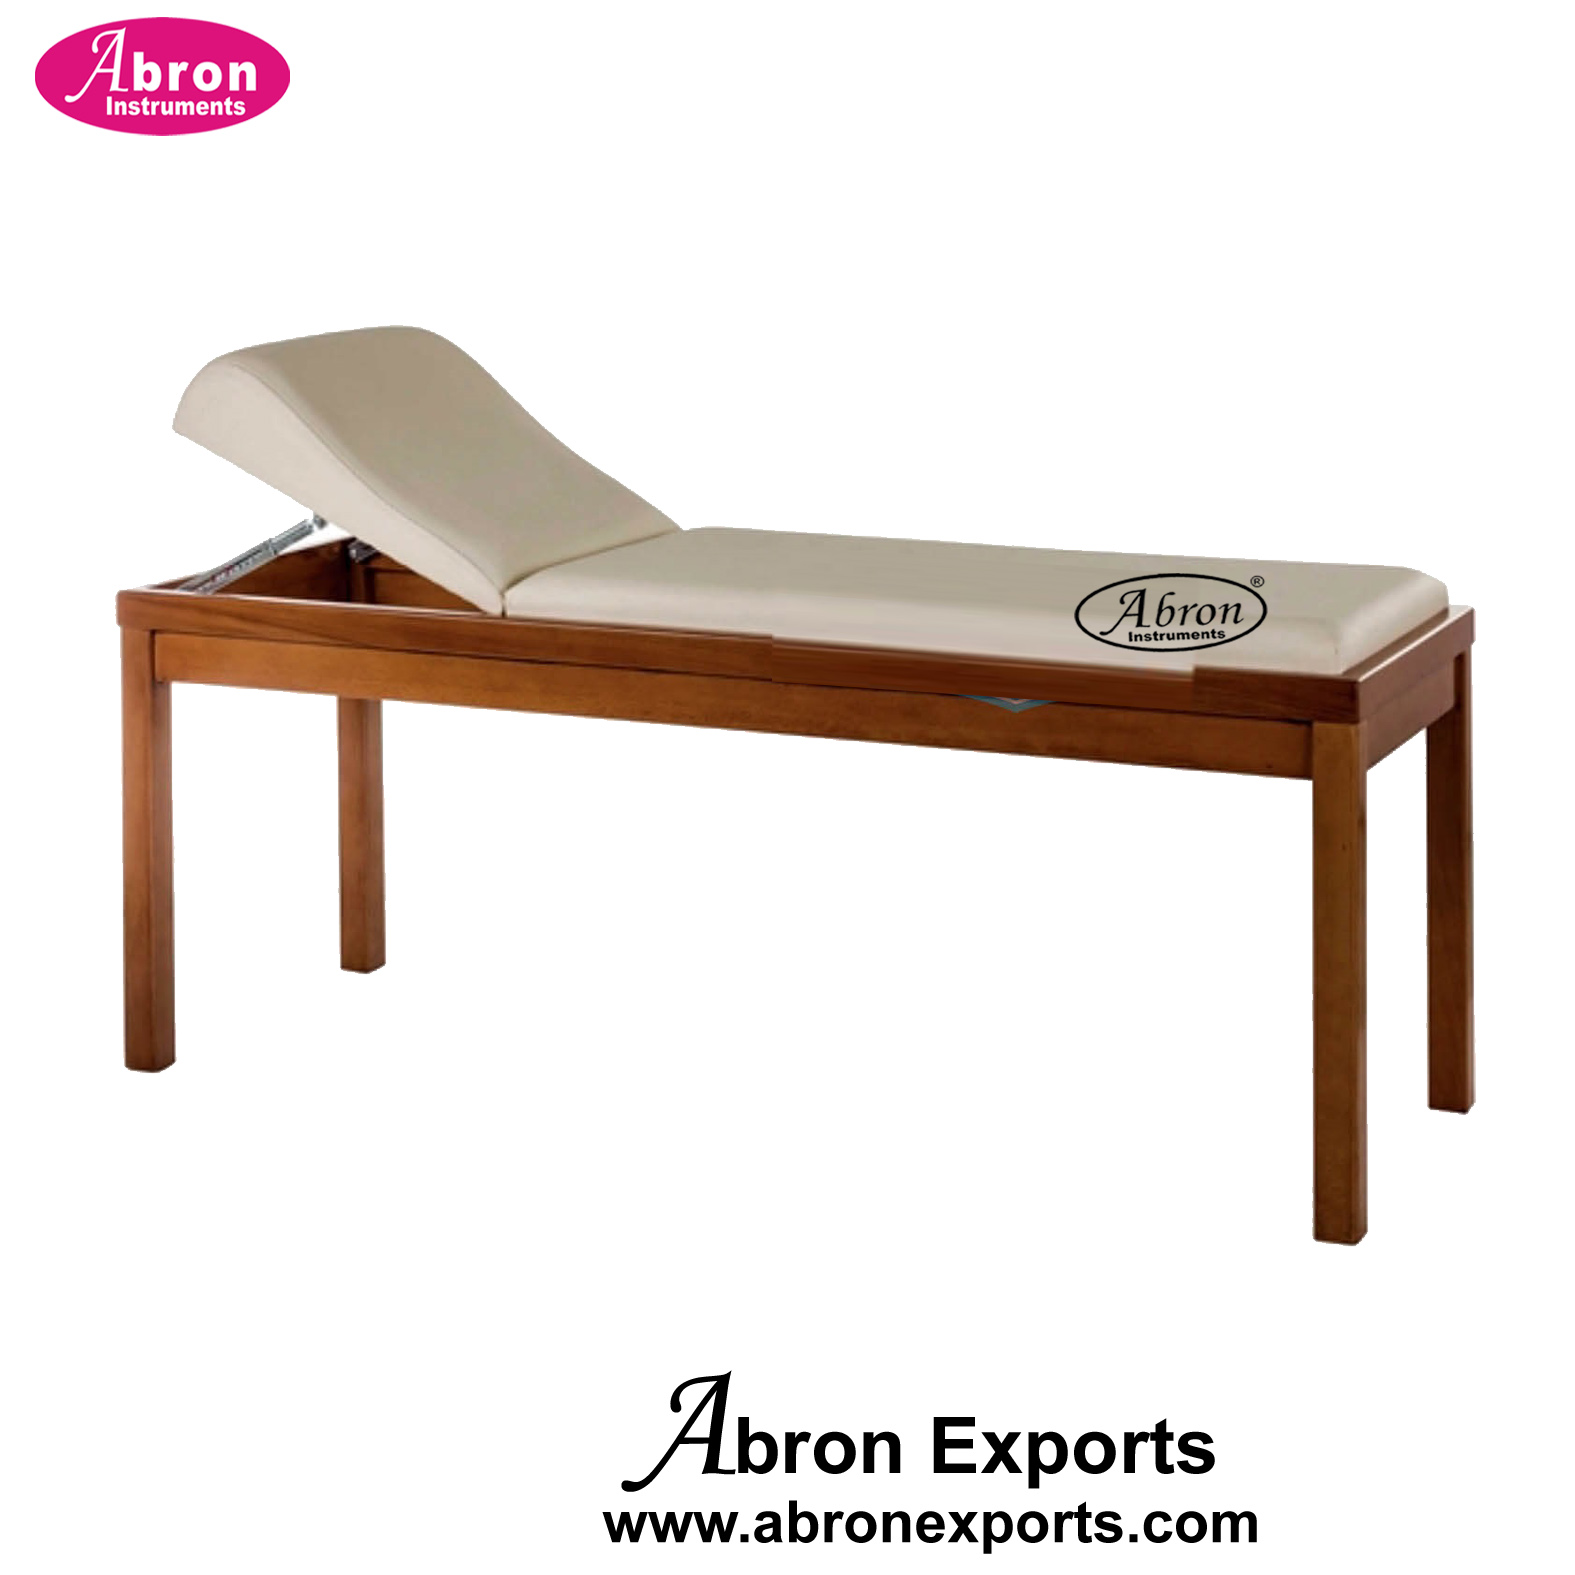 Examination Table Couch Wooden Blood Collection Table Examination With Matress Hospital Nursing Home Abron ABM-2713EW